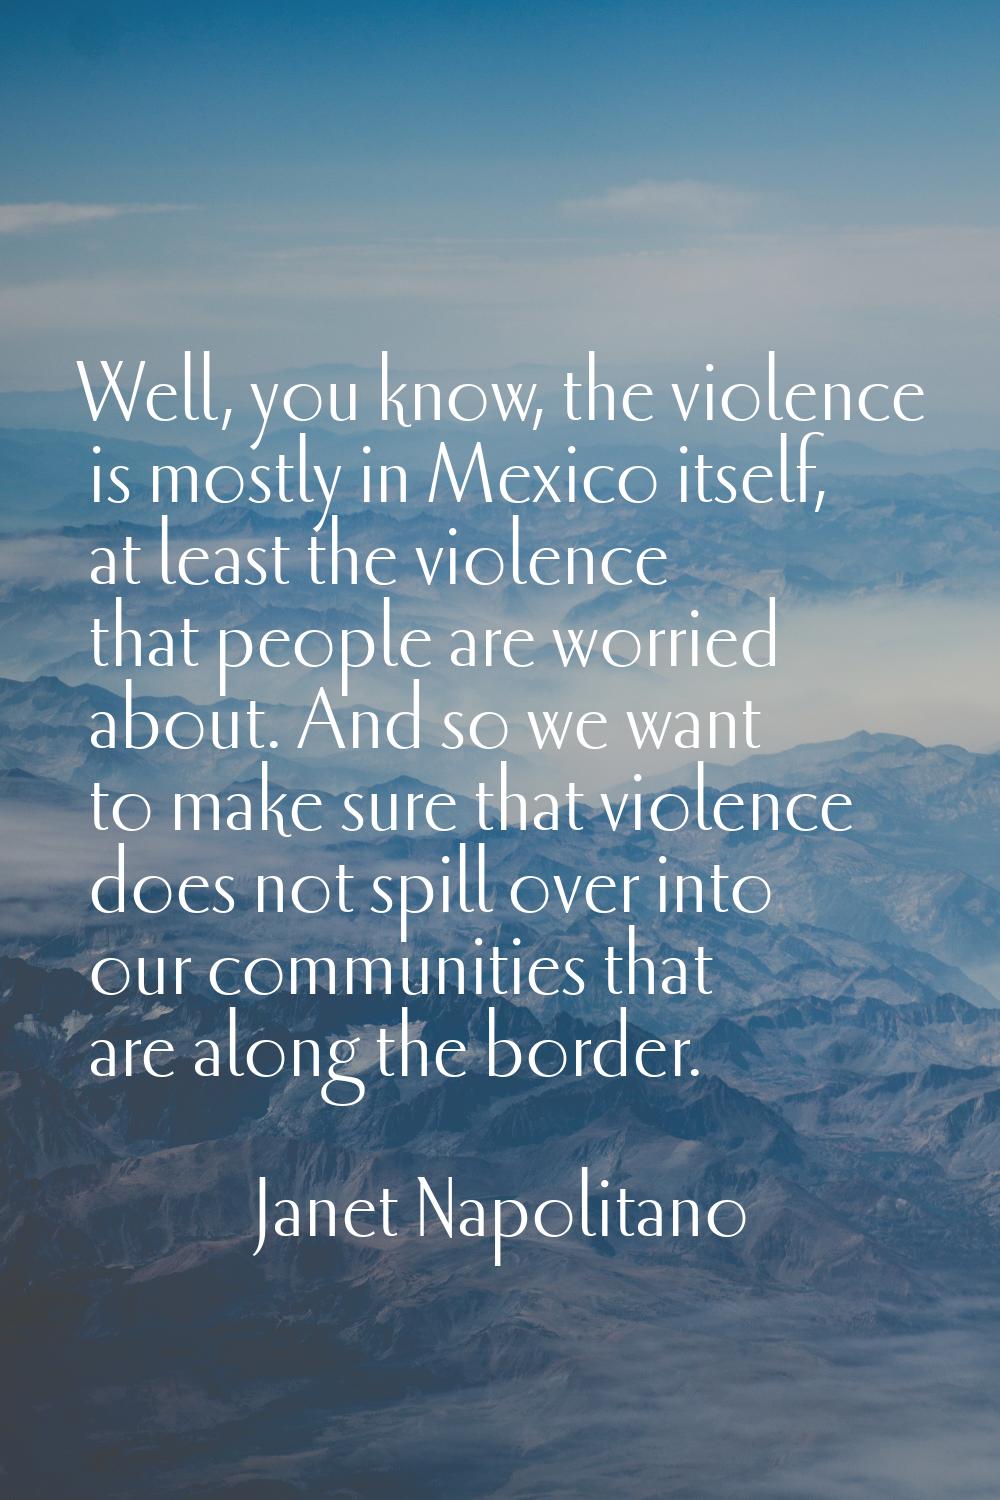 Well, you know, the violence is mostly in Mexico itself, at least the violence that people are worr